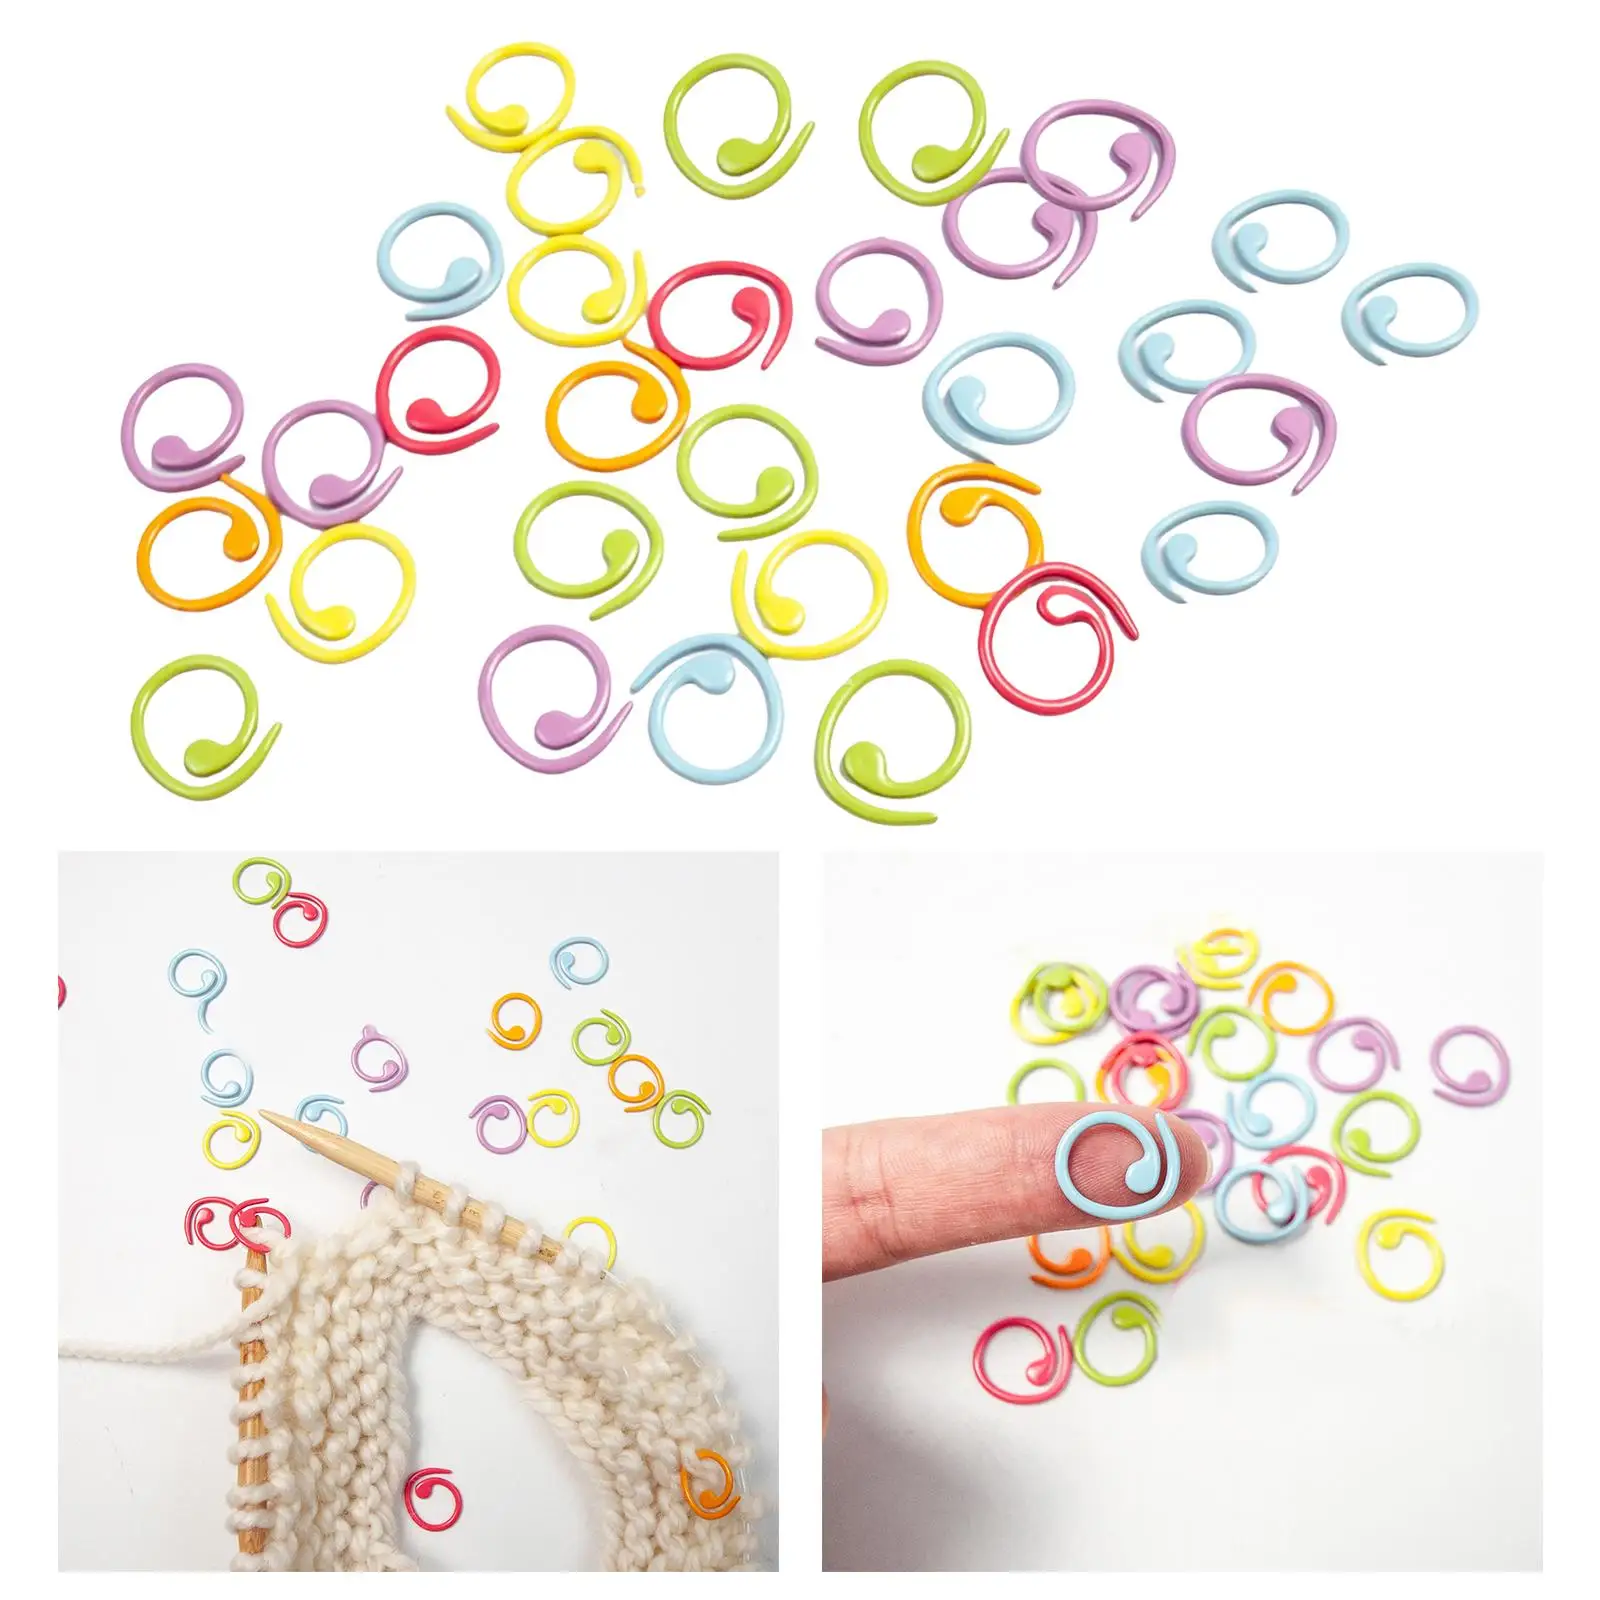 30Pcs Knitting Stitch Markers Stitch Markers Needles Point Protectors Stoppers Stitch Marker Ring for DIY Handmade Craft